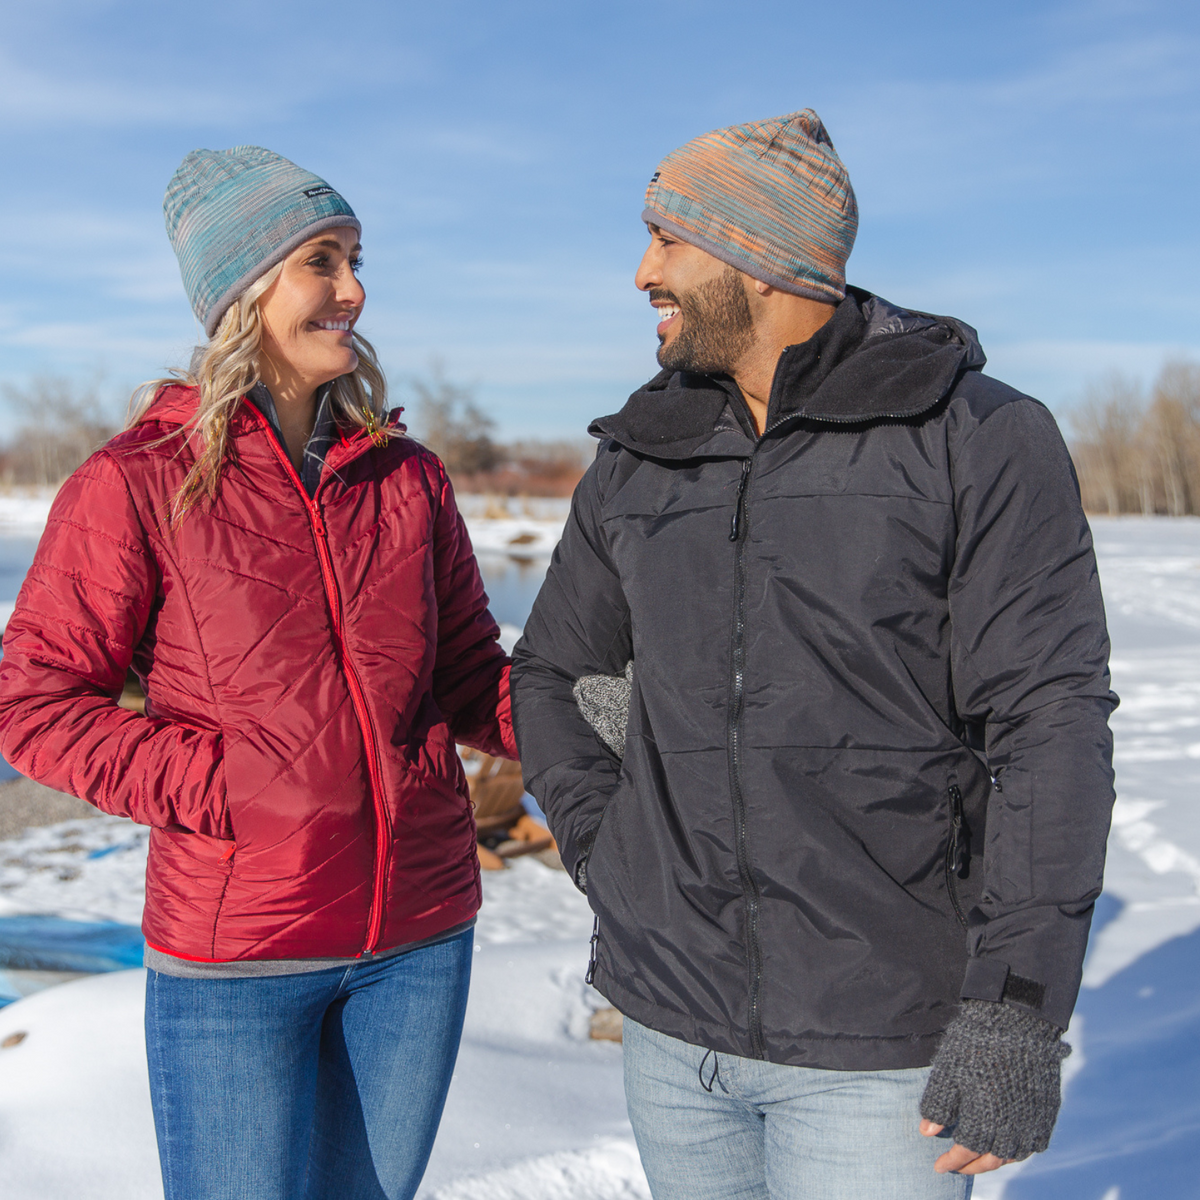 A woman and man smiling at each other and standing together in a sunny winter scene. The woman is wearing blue jeans, a cranberry red women&#39;s Electric Peak Parka, and a teal blue and gray soft comfortable warm winter hiking skiing outerwear Backcountry Beanie. The man is wearing handmade fingerless gloves, a graphite color Granite Peak Parka, and a teal, orange, and gray cozy moisture wicking Backcountry Beanie.